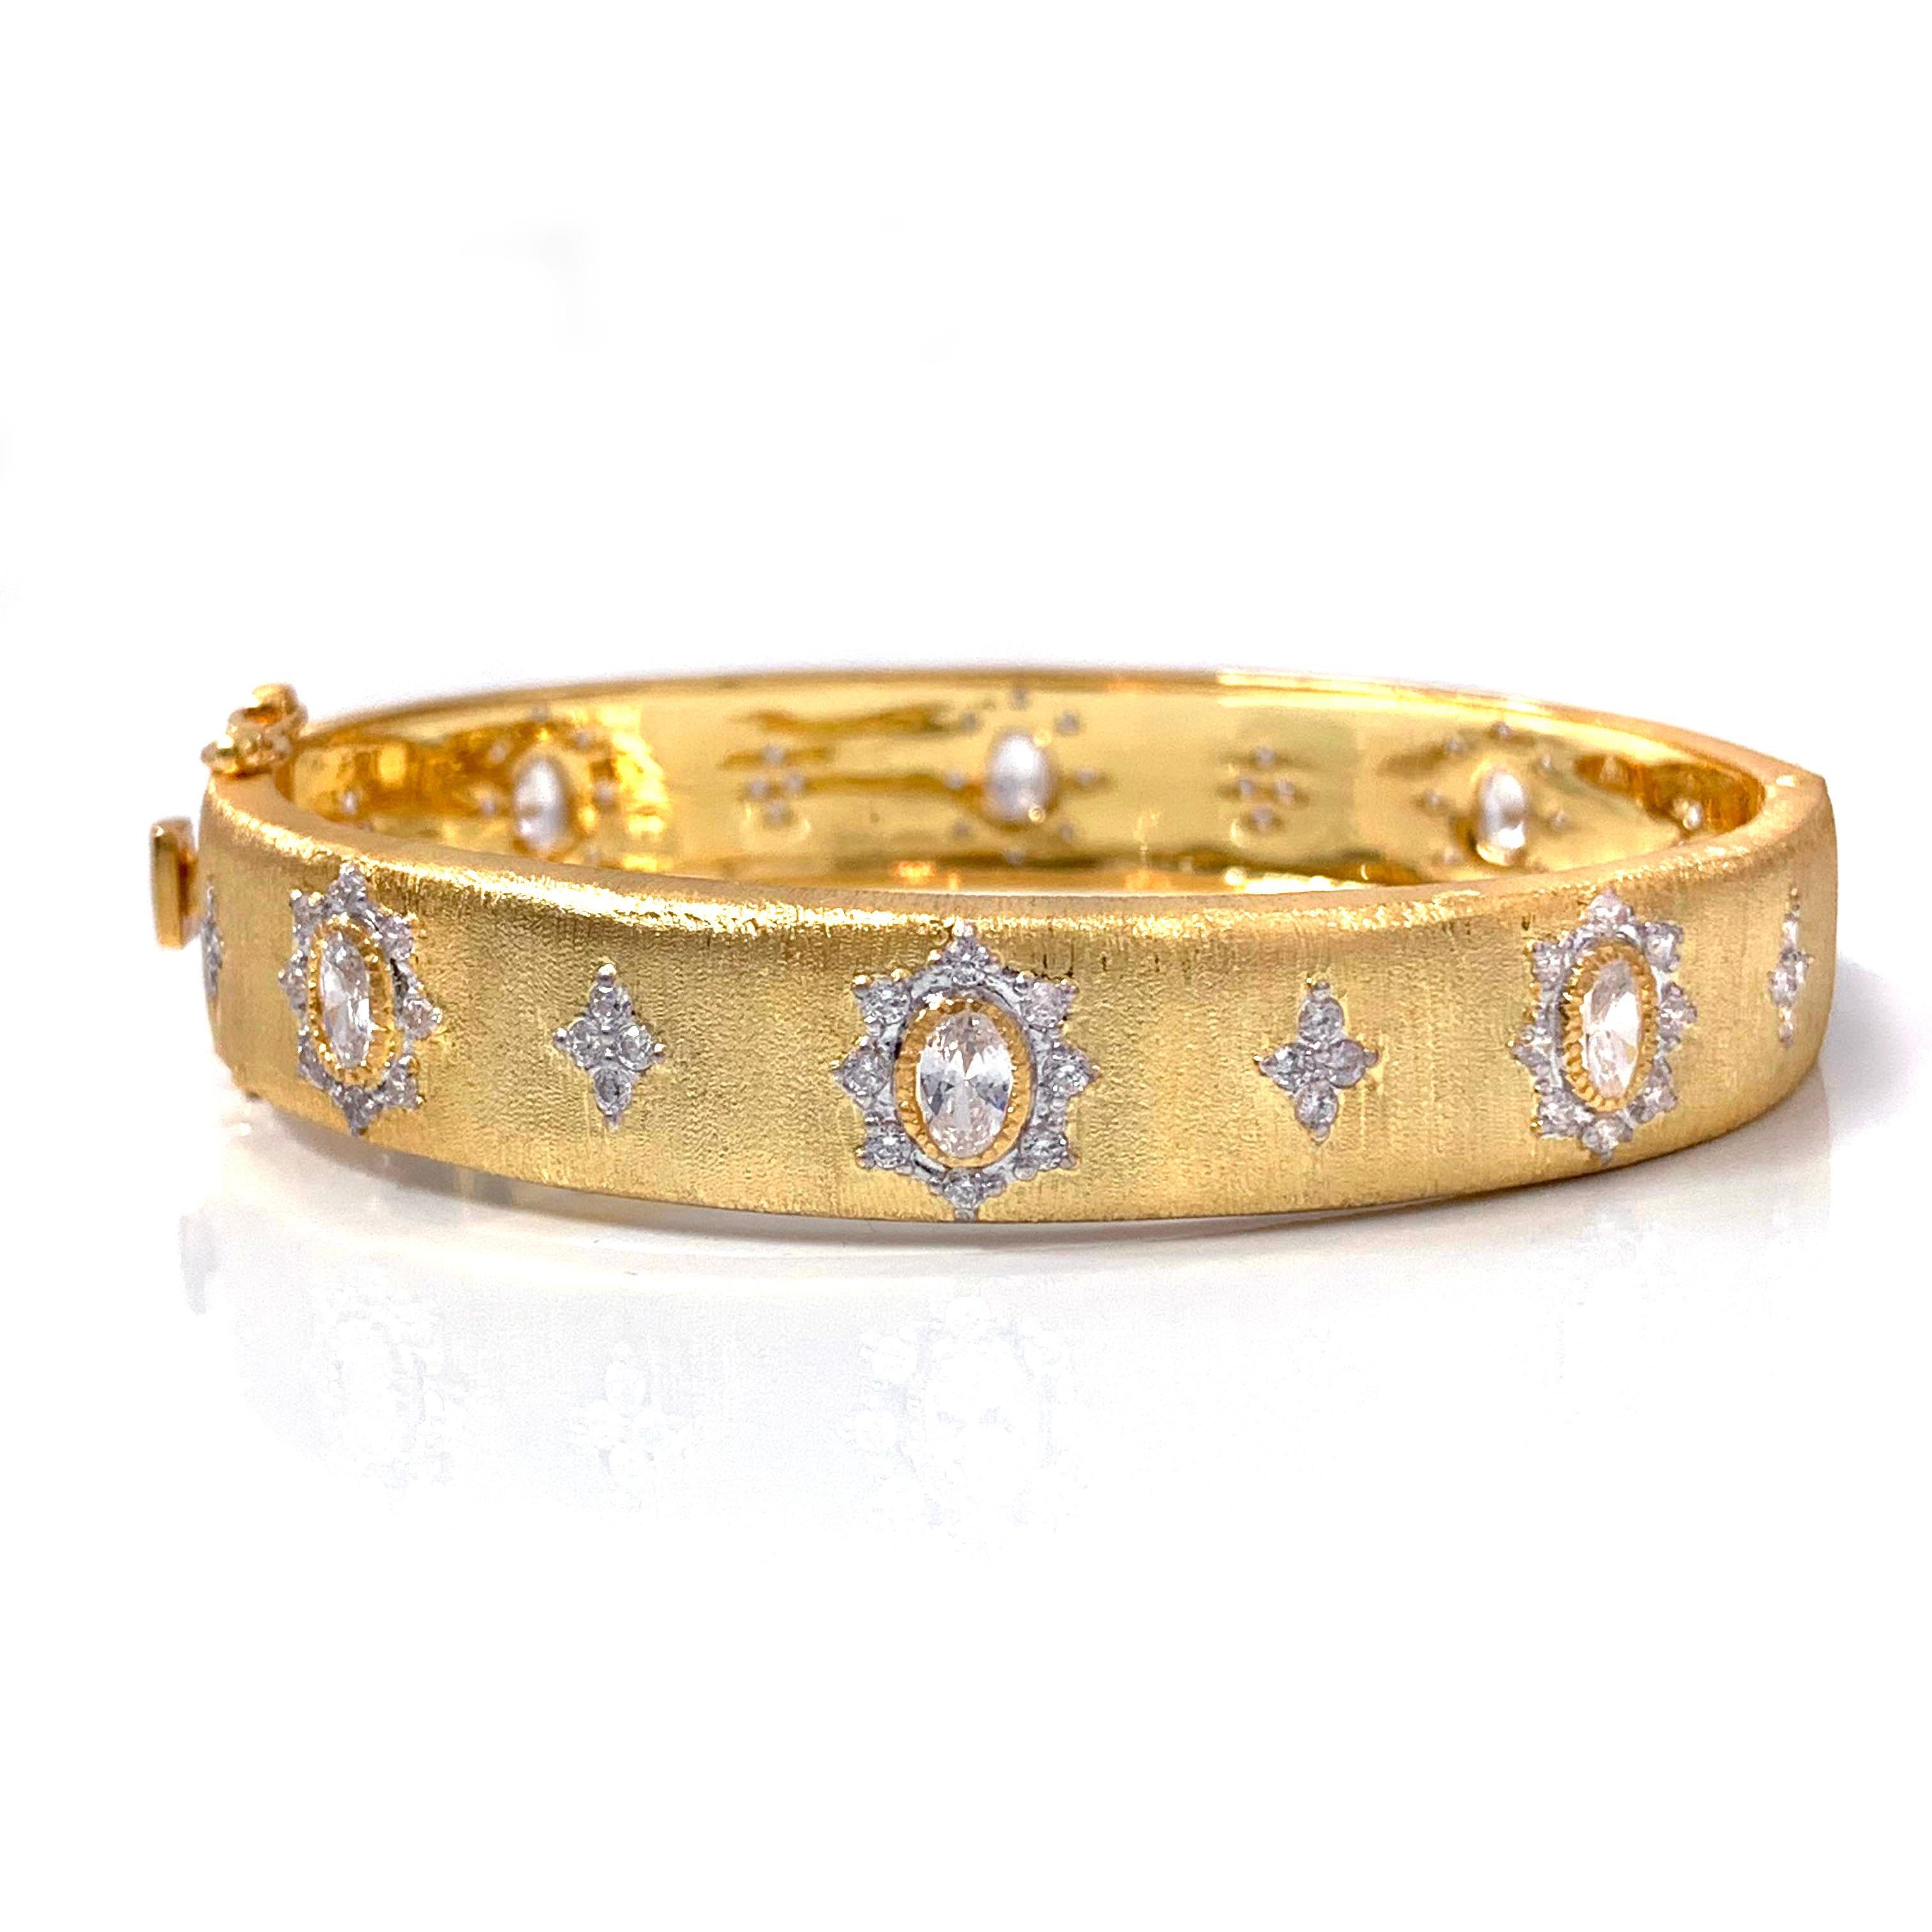 Bijoux Num hand-engraved star pattern vermeil bangle bracelet. 

This beautiful bracelet features over 80 pcs of oval and round simulated diamonds, handcrafted Italian 